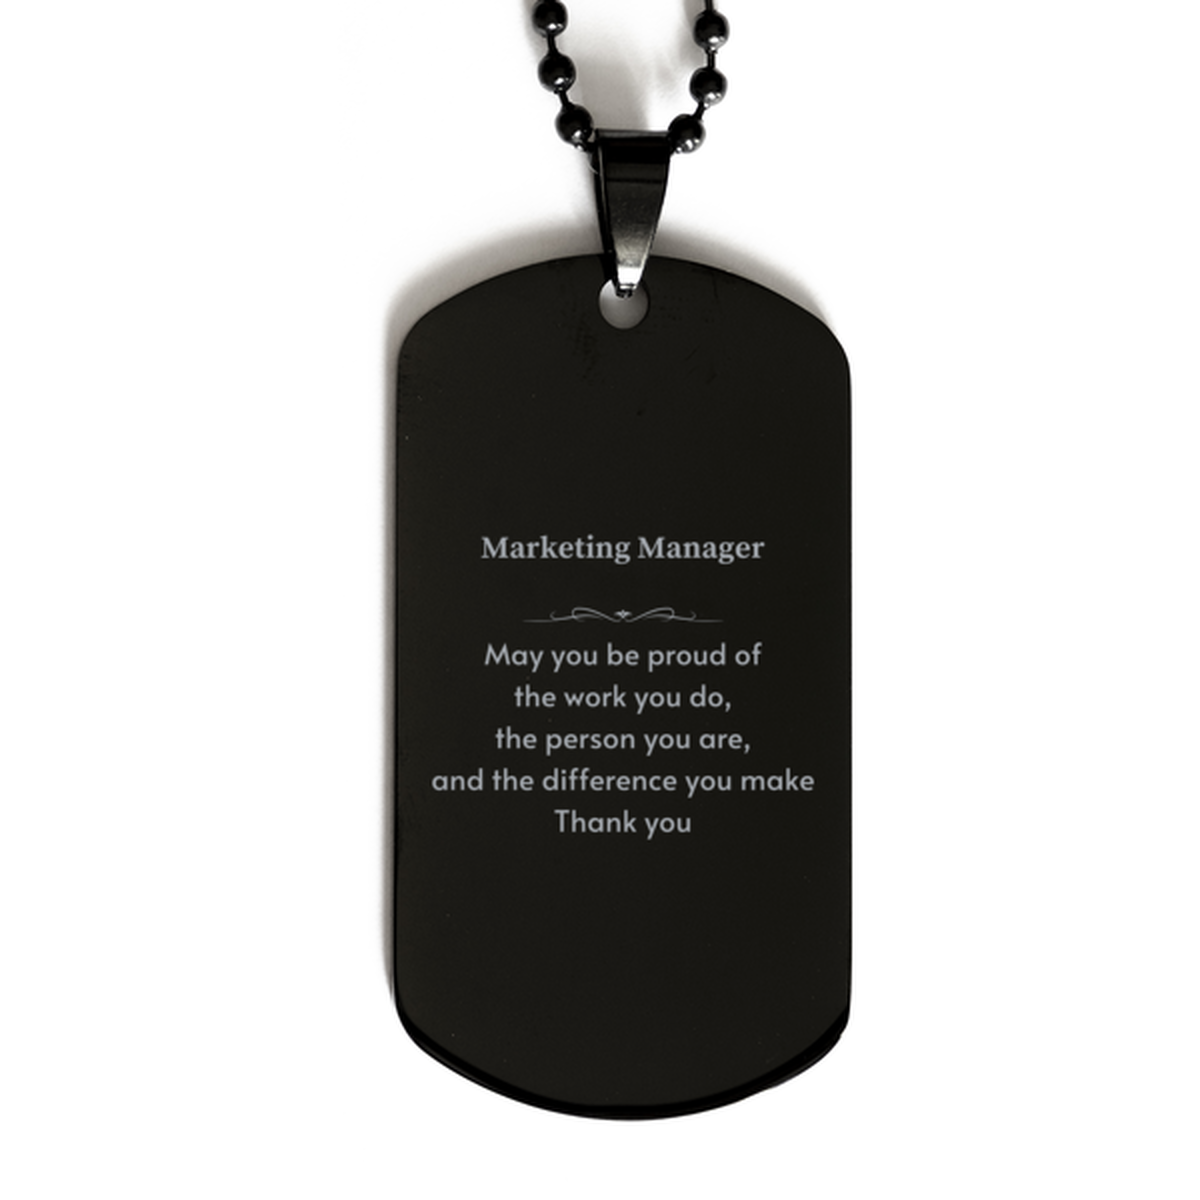 Heartwarming Black Dog Tag Retirement Coworkers Gifts for Marketing Manager, Marketing Manager May You be proud of the work you do, the person you are Gifts for Boss Men Women Friends